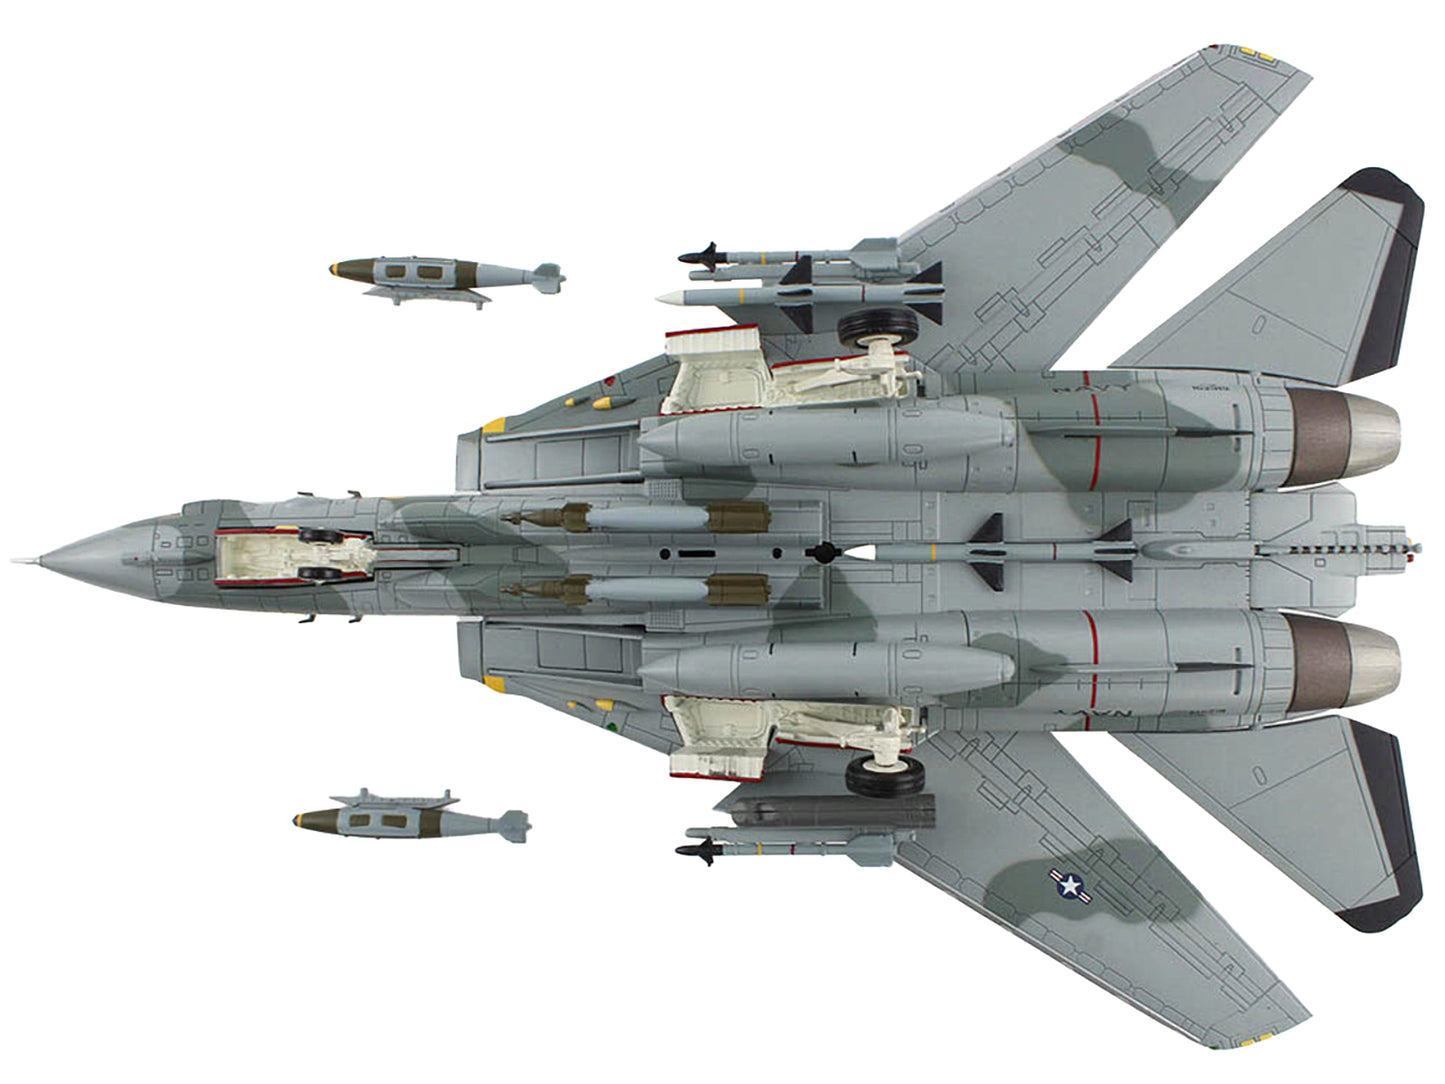 Grumman F-14B Tomcat Fighter Aircraft "VF-74 'Be-Devilers'" (1994) United States Navy "Air Power Series" 1/72 Diecast Model by Hobby Master